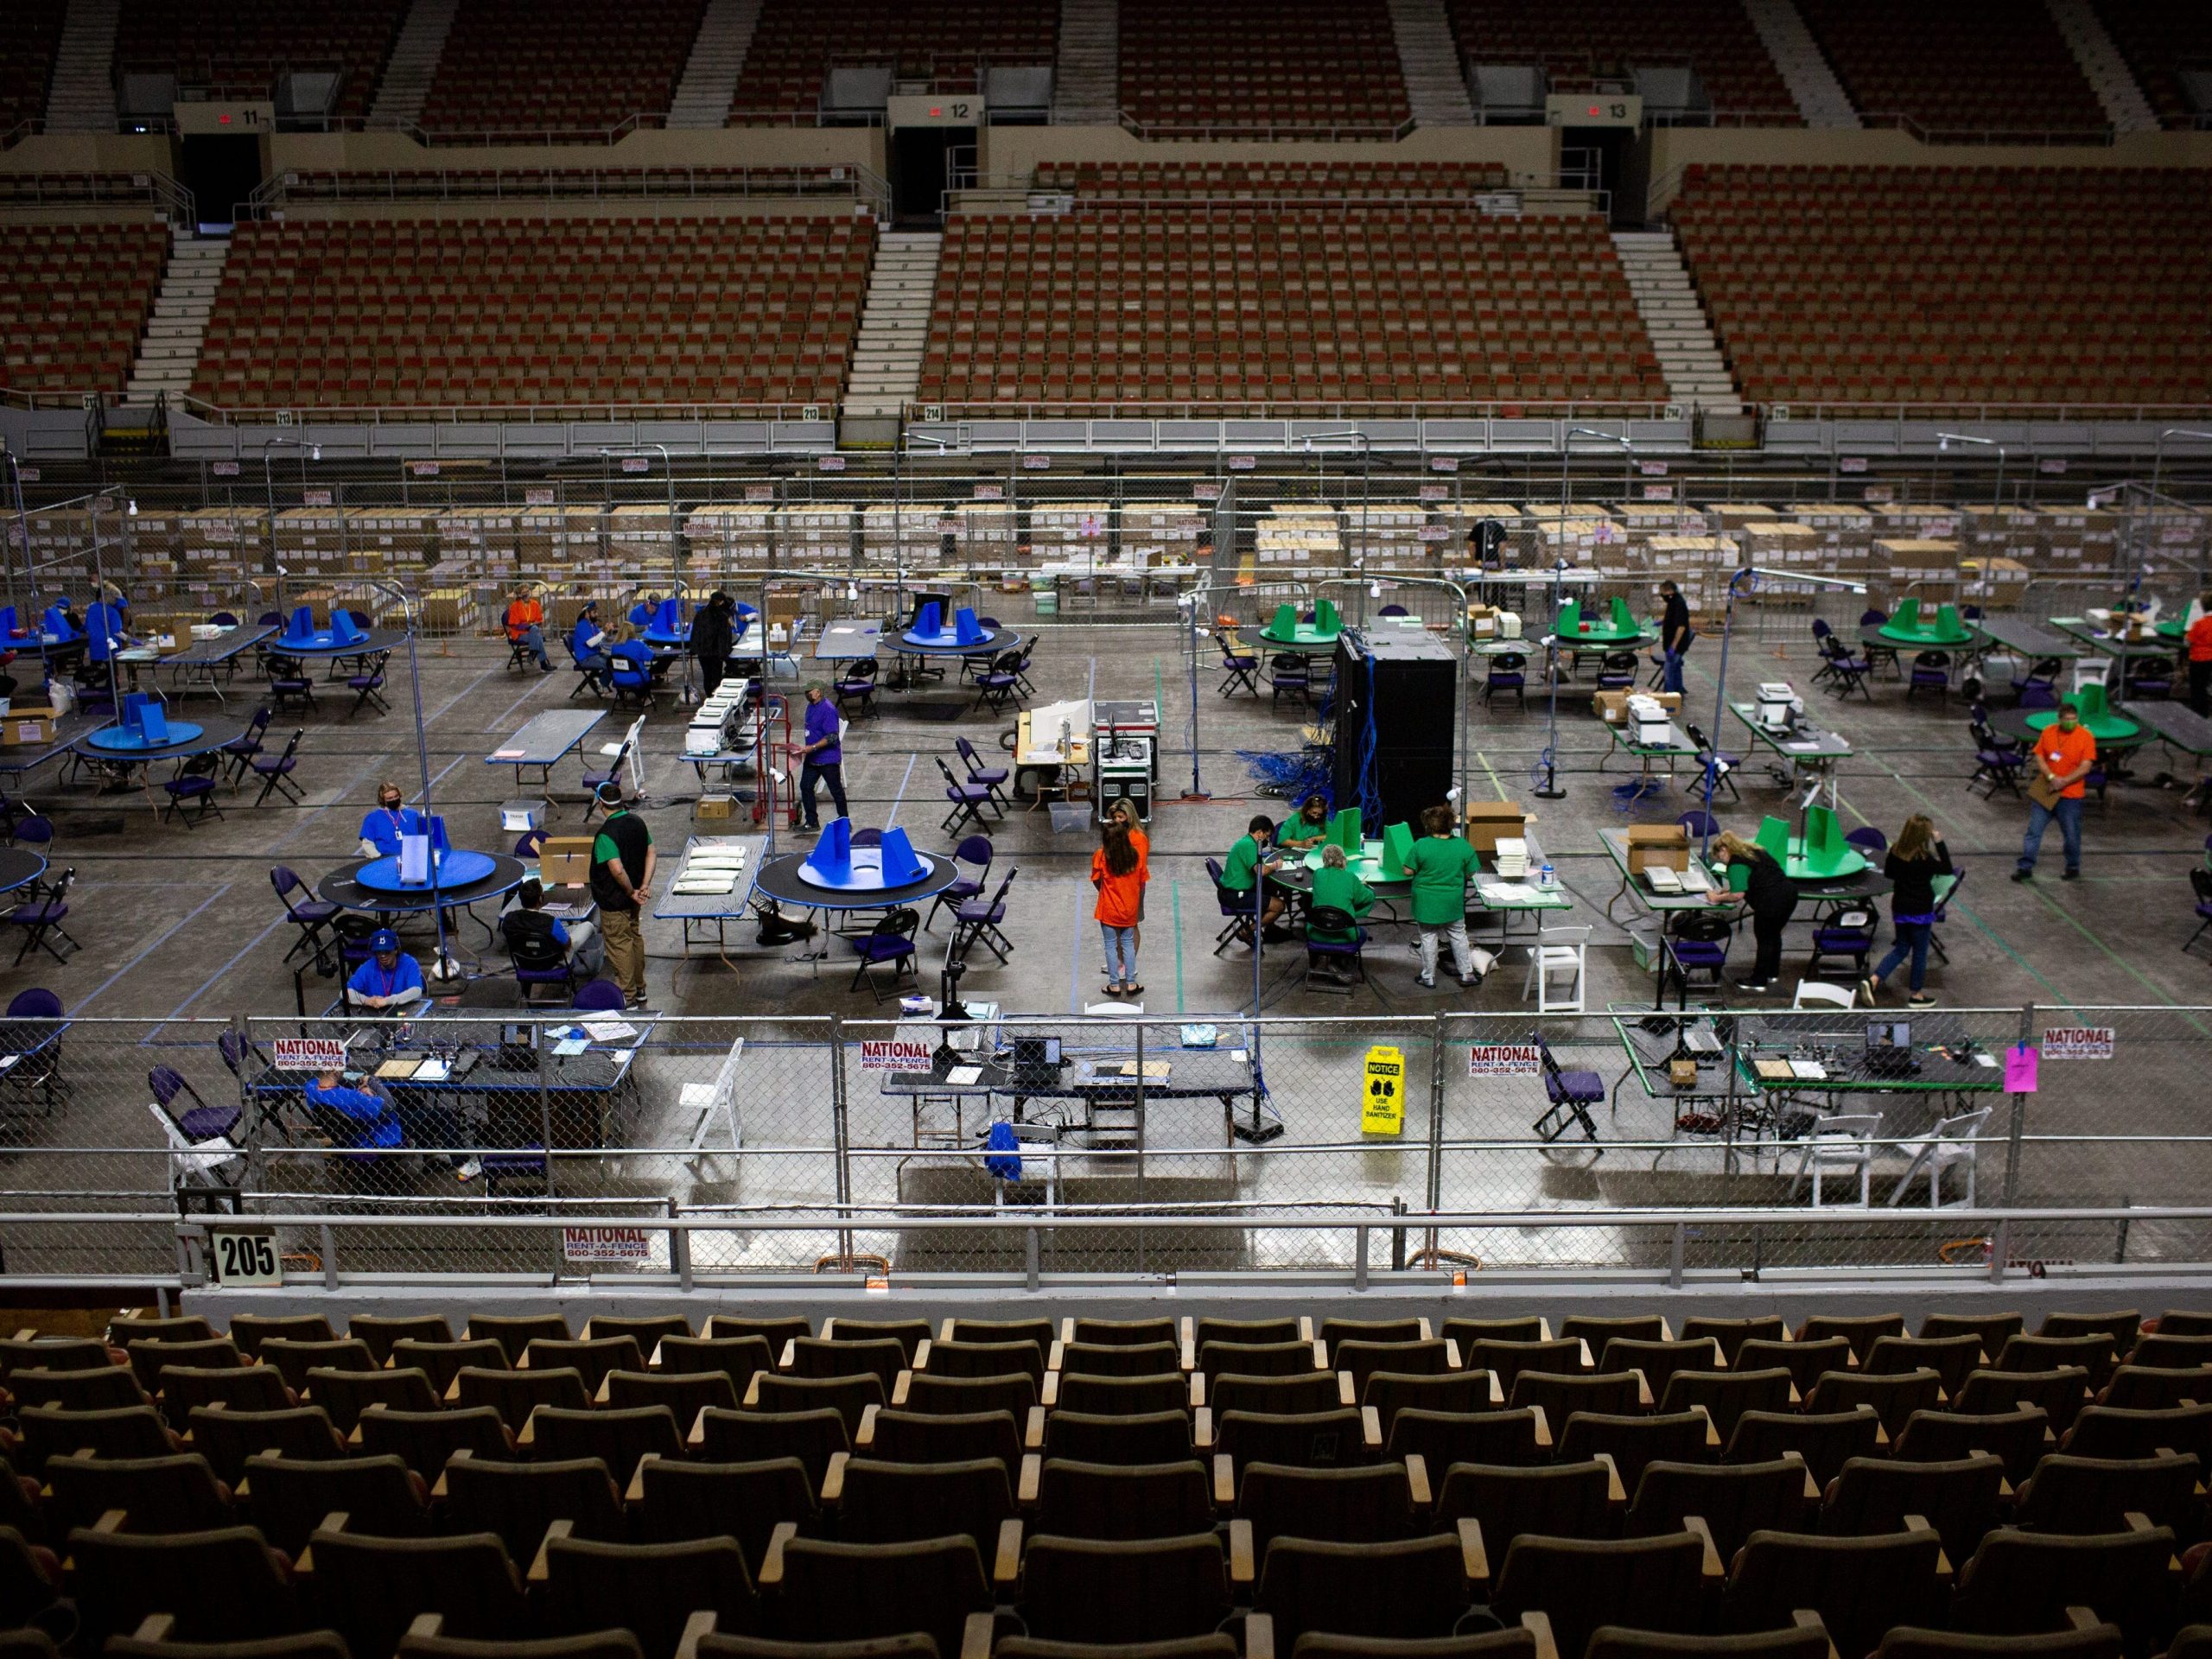 Contractors working for Cyber Ninjas, who was hired by the Arizona State Senate, examine and recount ballots from the 2020 general election on May 3, 2021 in Phoenix, Arizona.